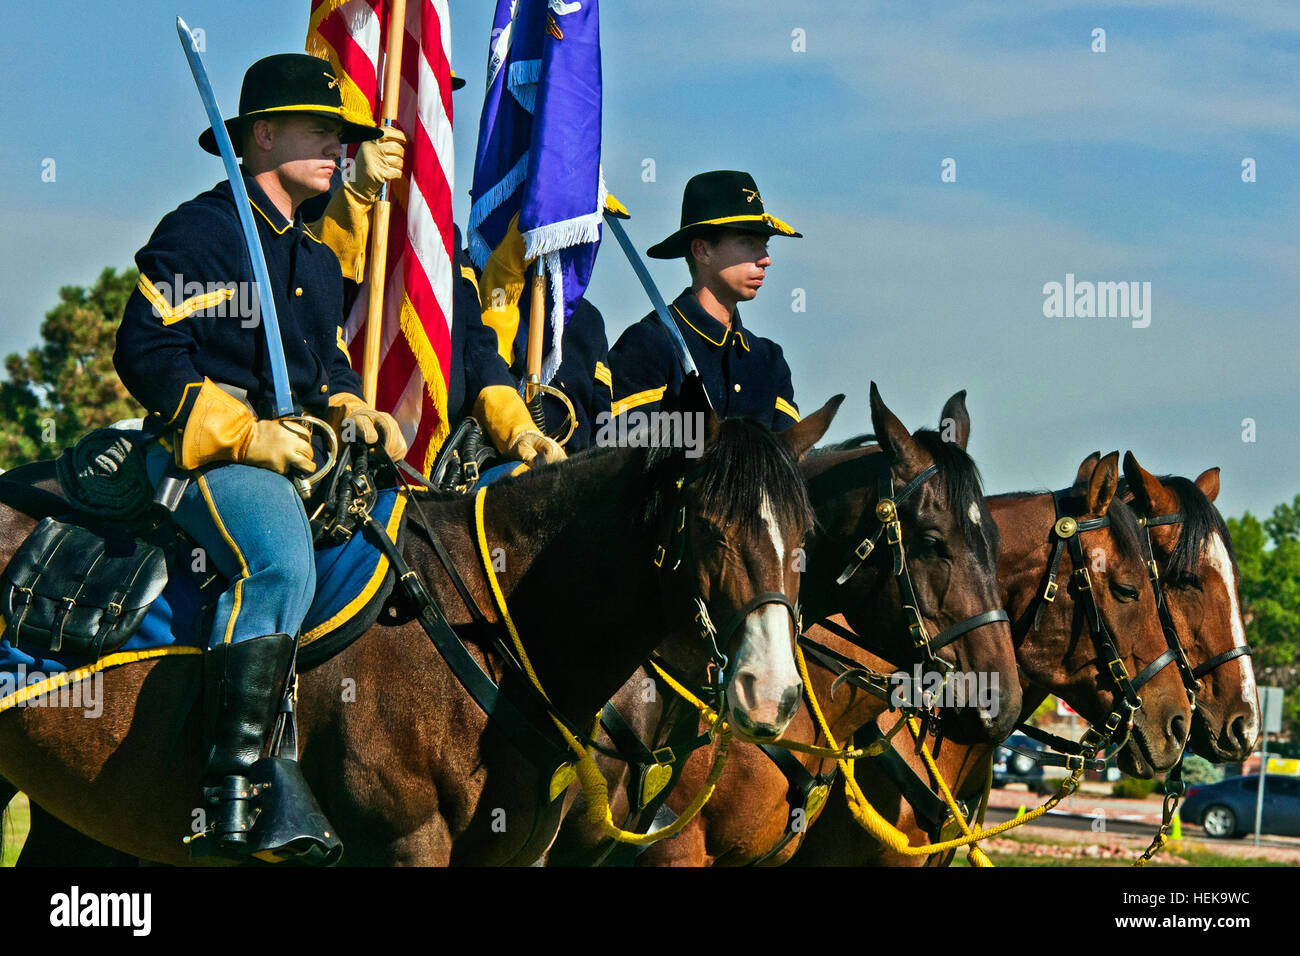 Fort Carsonâ€™s mounted color guard stands alongside soldiers from the 440th Civil Affairs Bn. at Fort Carson, Colo., Sept. 15, 2012. Flickr - The U.S. Army - Horse Soldiers Stock Photo